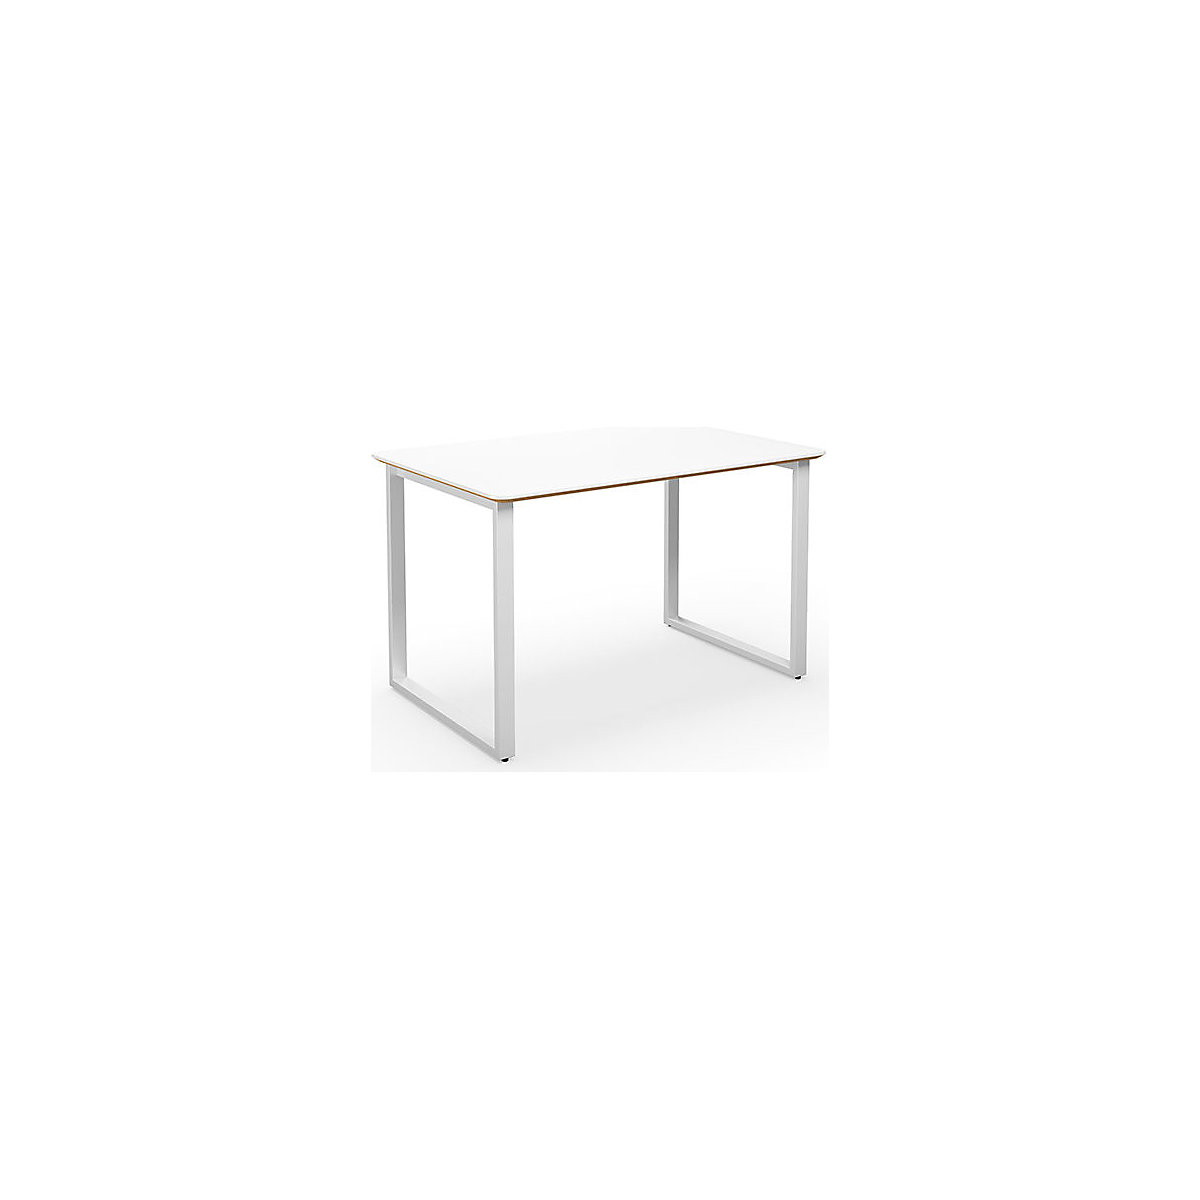 DUO-O Trend multi-purpose desk, straight tabletop, rounded corners, WxD 1200 x 800 mm, white, white-2